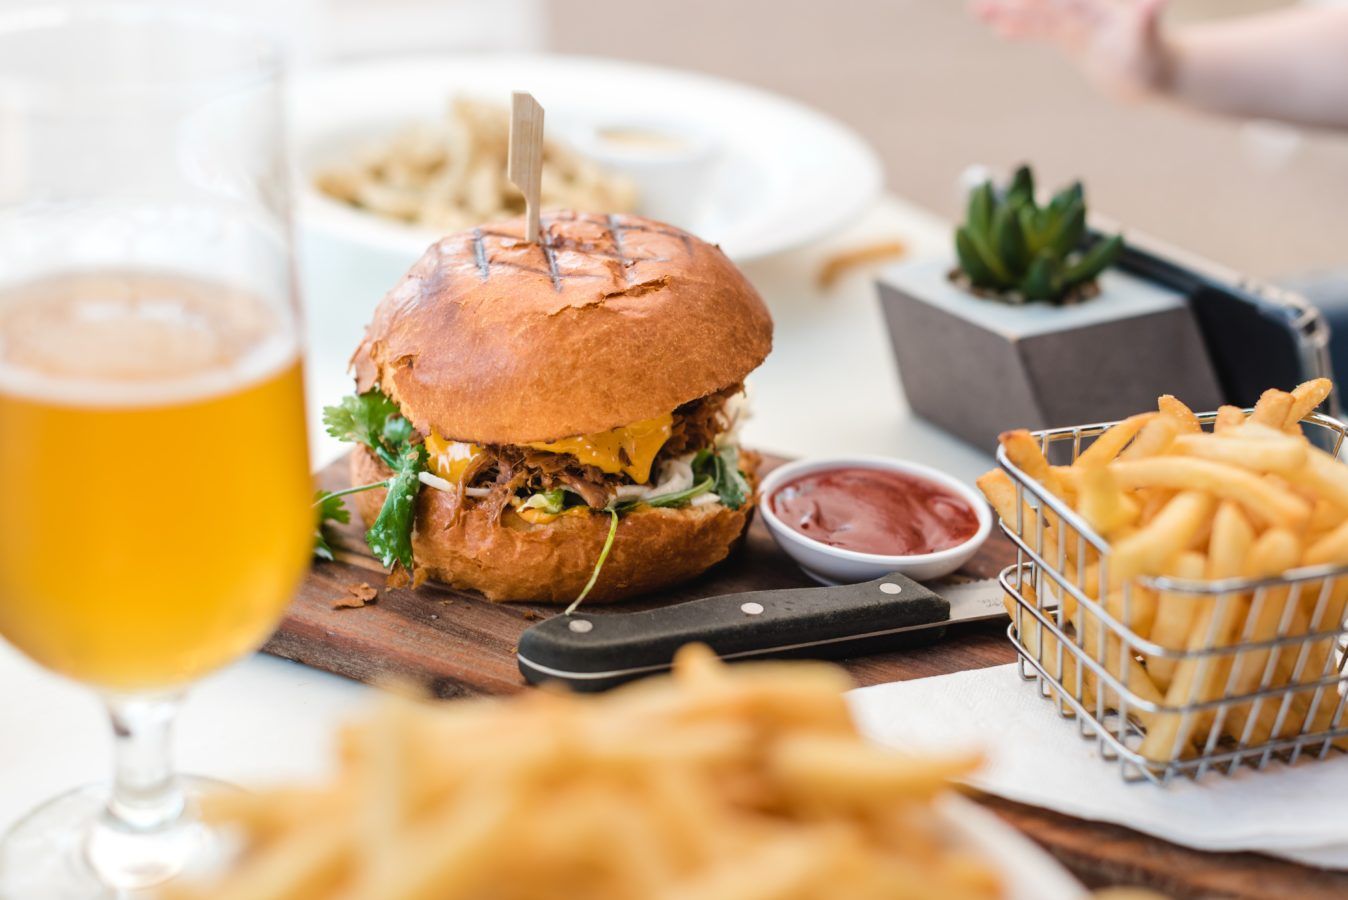 Where to find the best, most juicy burgers in Phuket